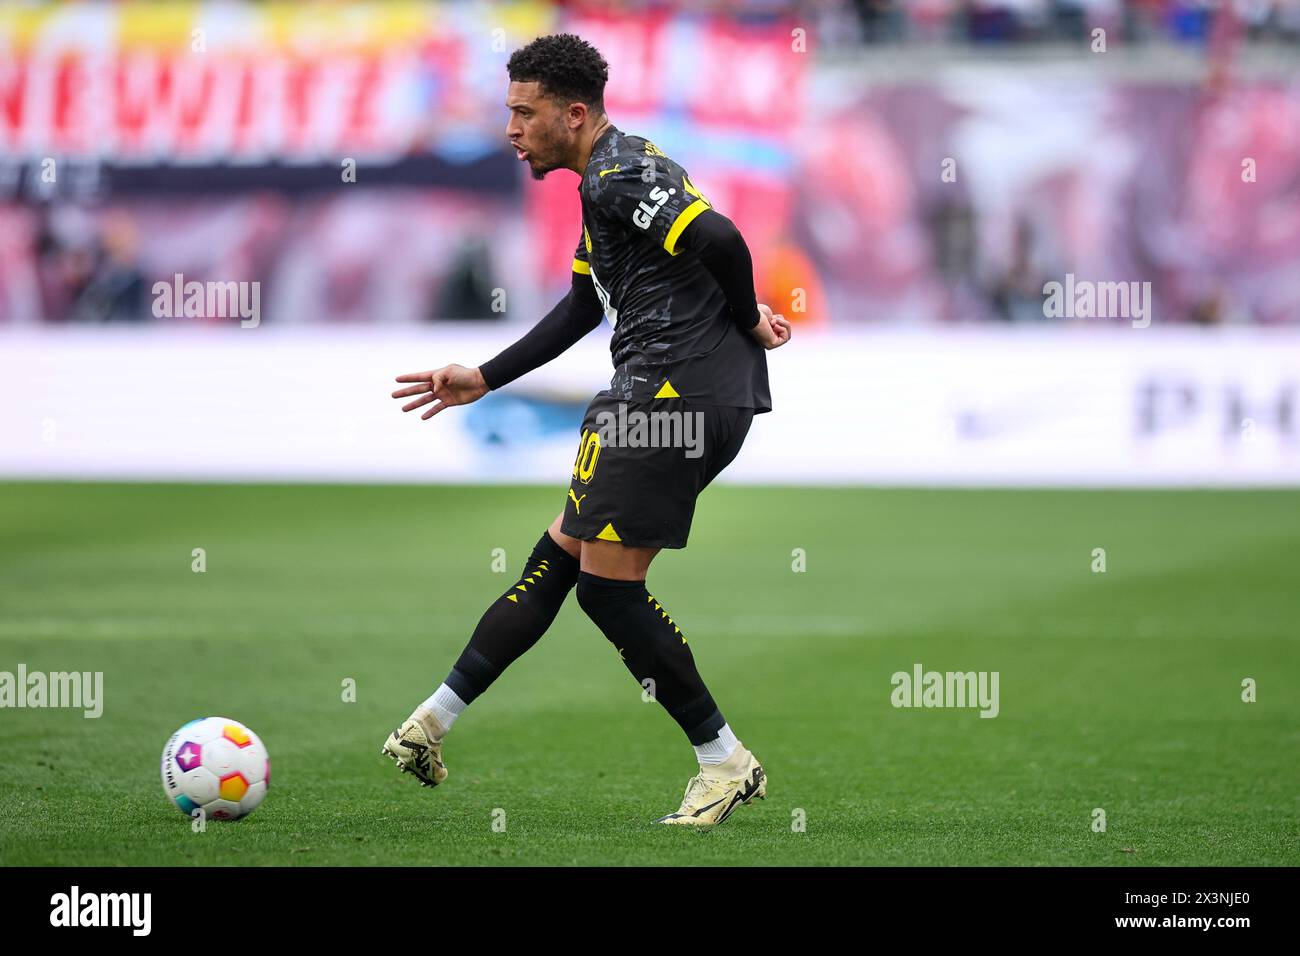 Leipzig, Germany. 27th Apr, 2024. Soccer: Bundesliga, RB Leipzig - Borussia Dortmund, Matchday 31 at the Red Bull Arena. Dortmund player Jadon Sancho on the ball. Credit: Jan Woitas/dpa - IMPORTANT NOTE: In accordance with the regulations of the DFL German Football League and the DFB German Football Association, it is prohibited to utilize or have utilized photographs taken in the stadium and/or of the match in the form of sequential images and/or video-like photo series./dpa/Alamy Live News Stock Photo